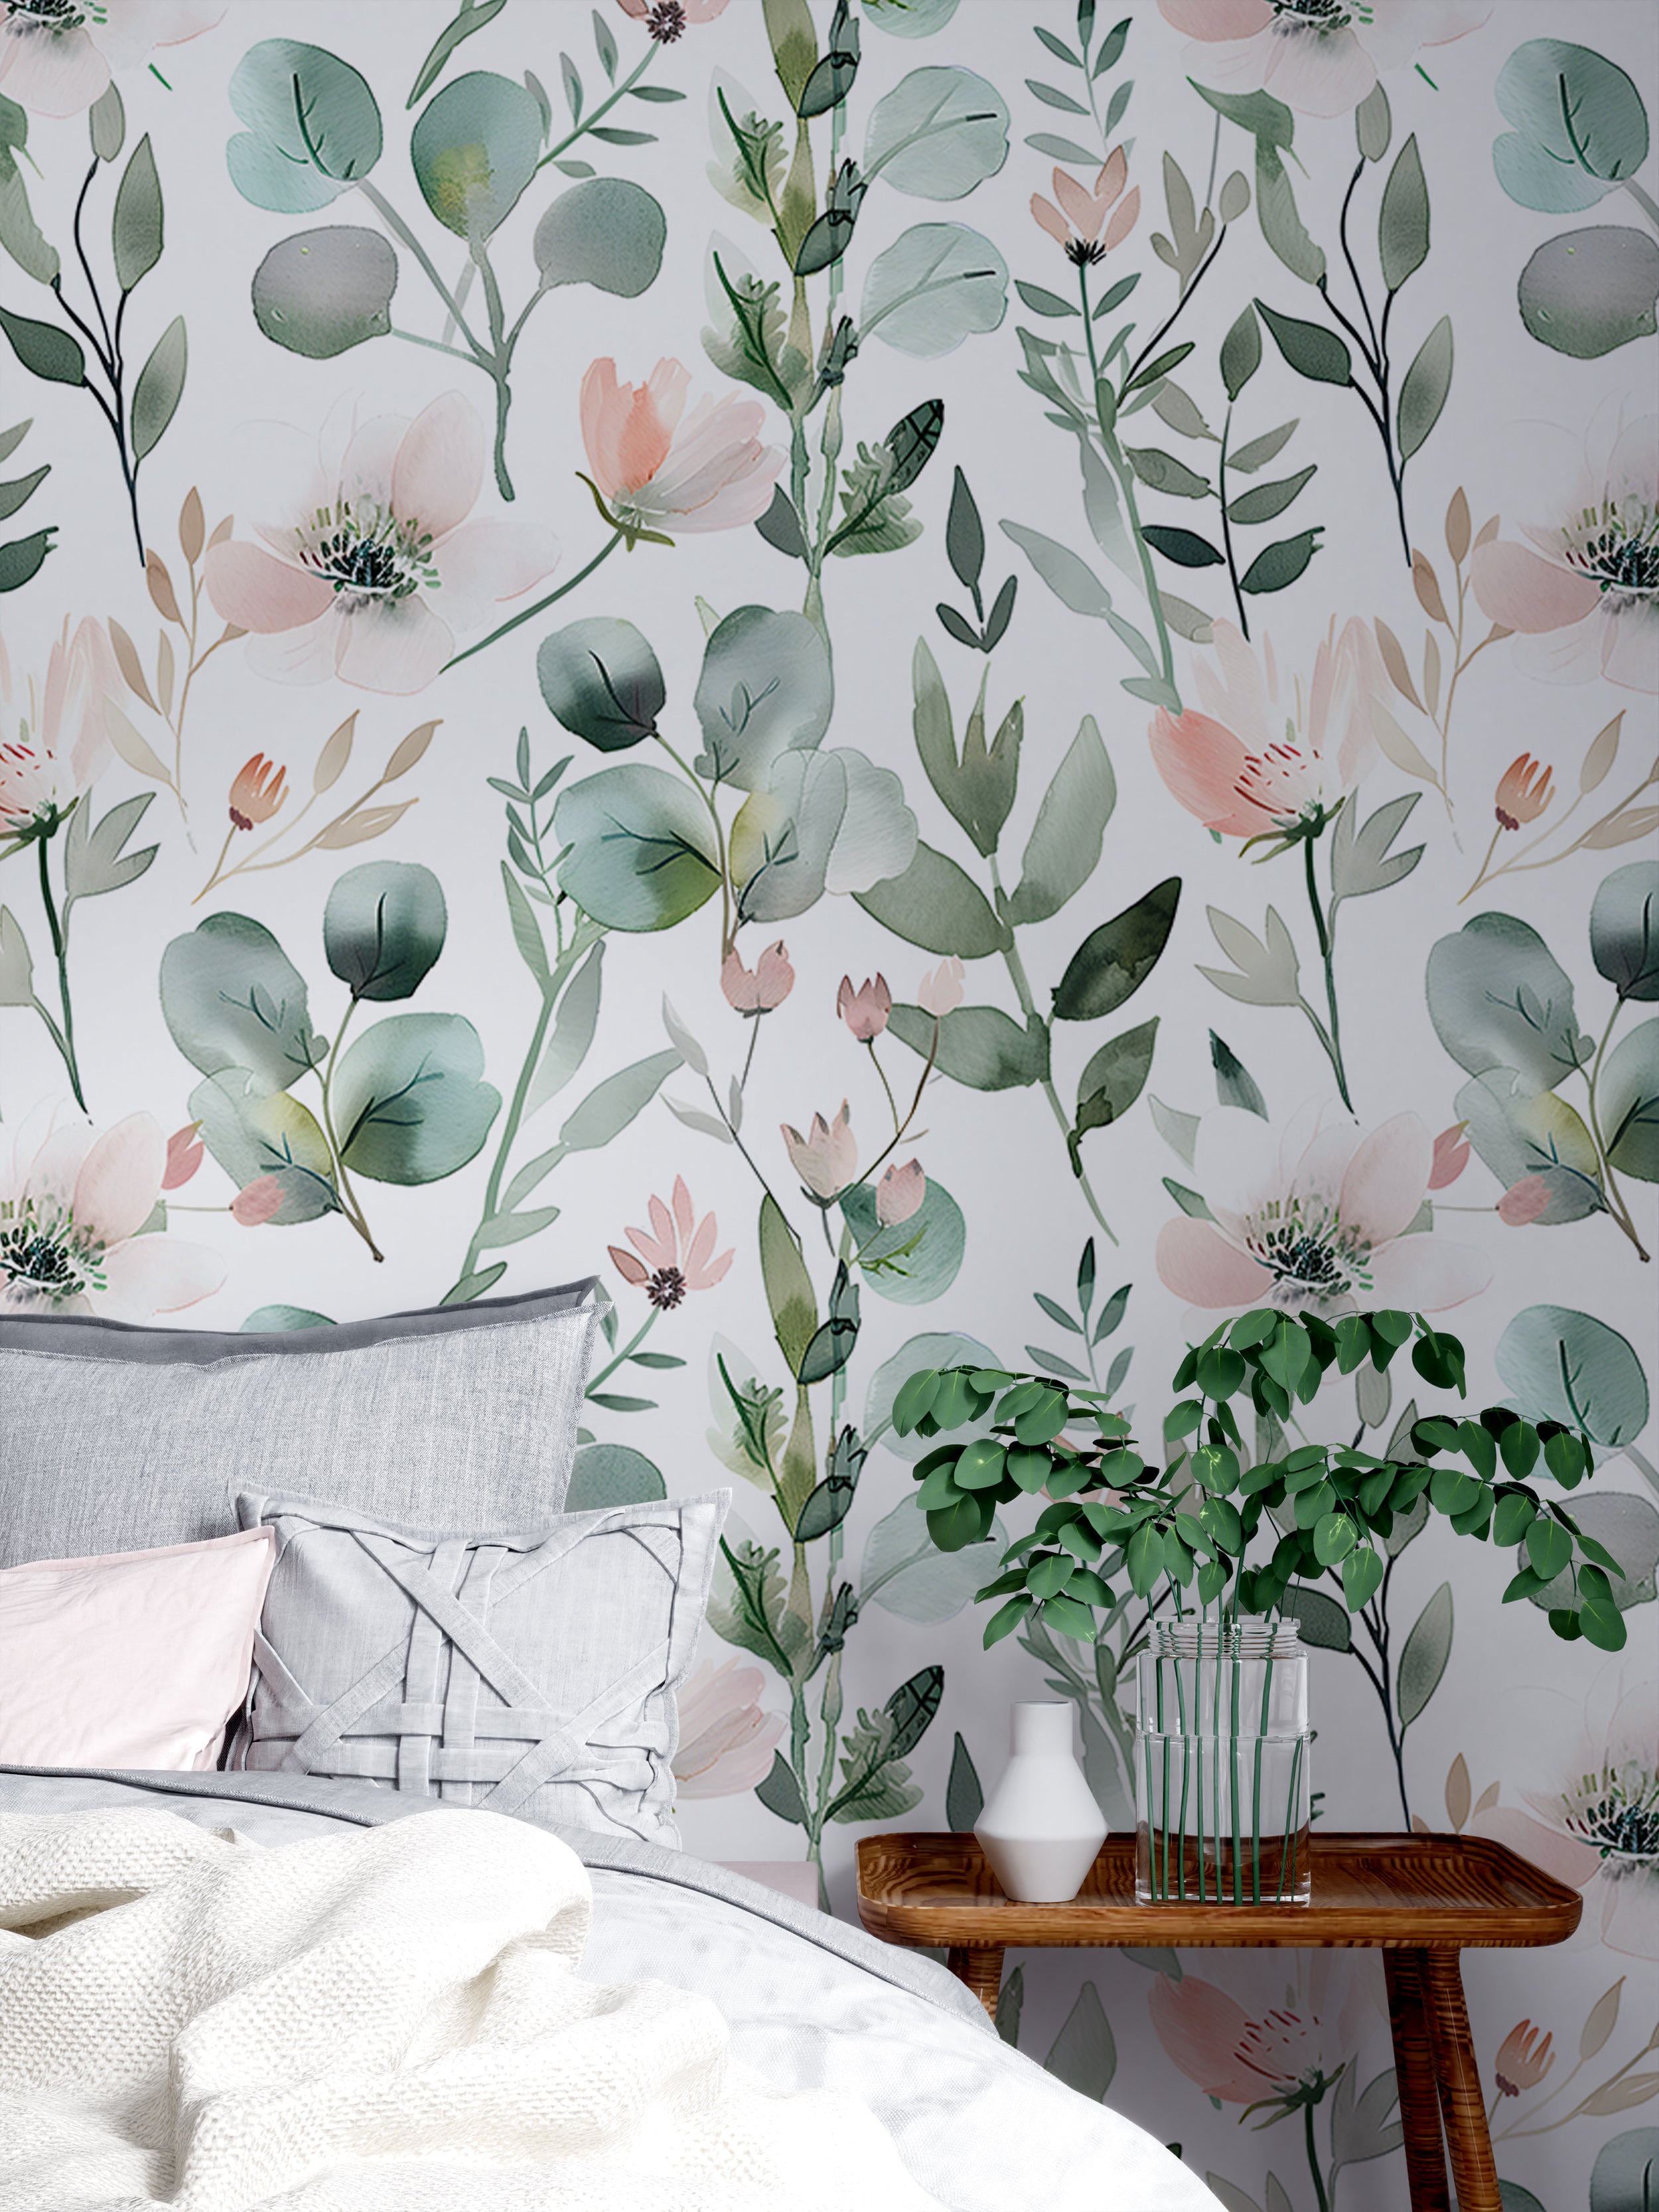 Peel and stick floral wallpaper for easy installation